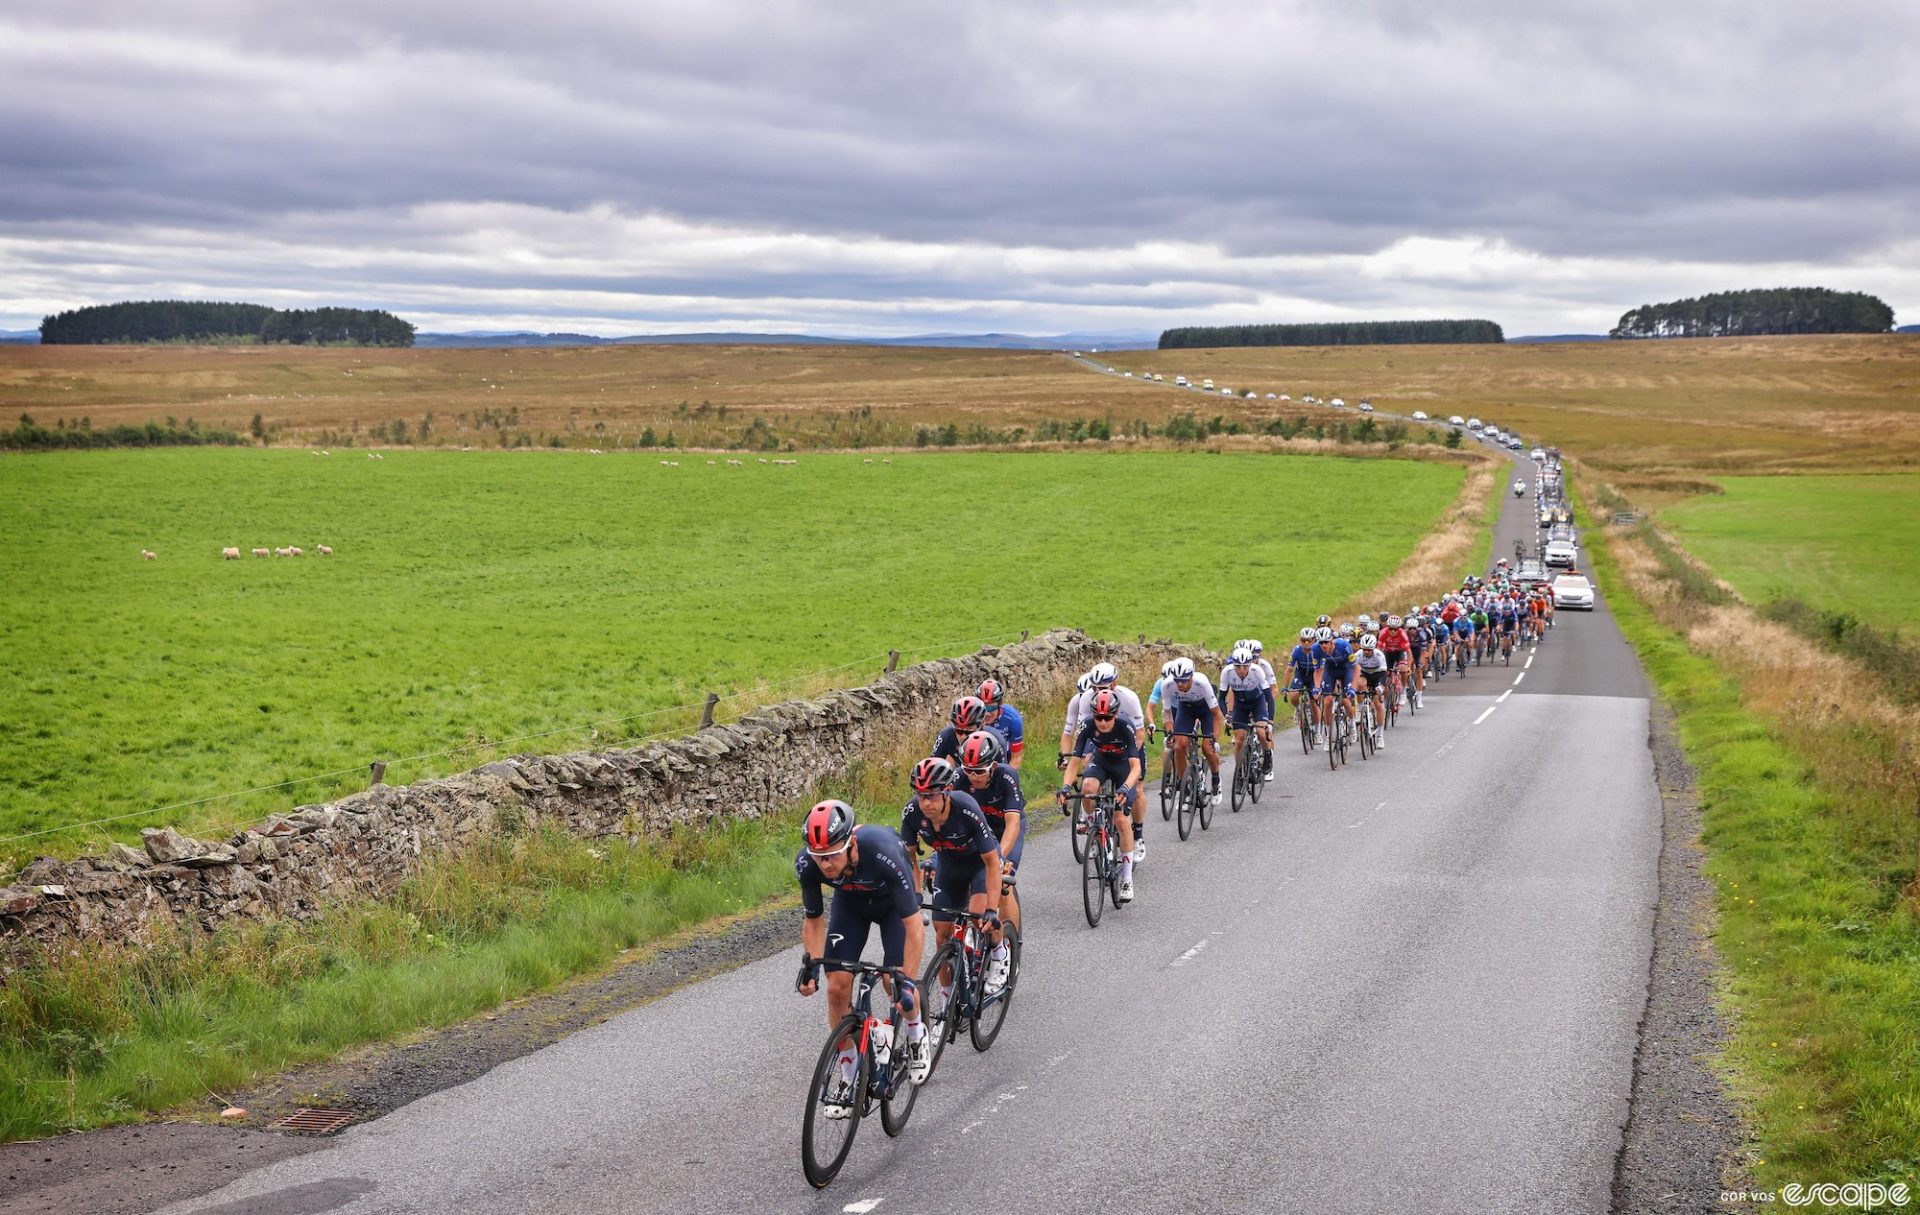 The Ineos Grenadiers team leads the peloton across a lush green landscape in Scotland en route to Edinburgh on stage 7 of the 2021 Tour of Britain.